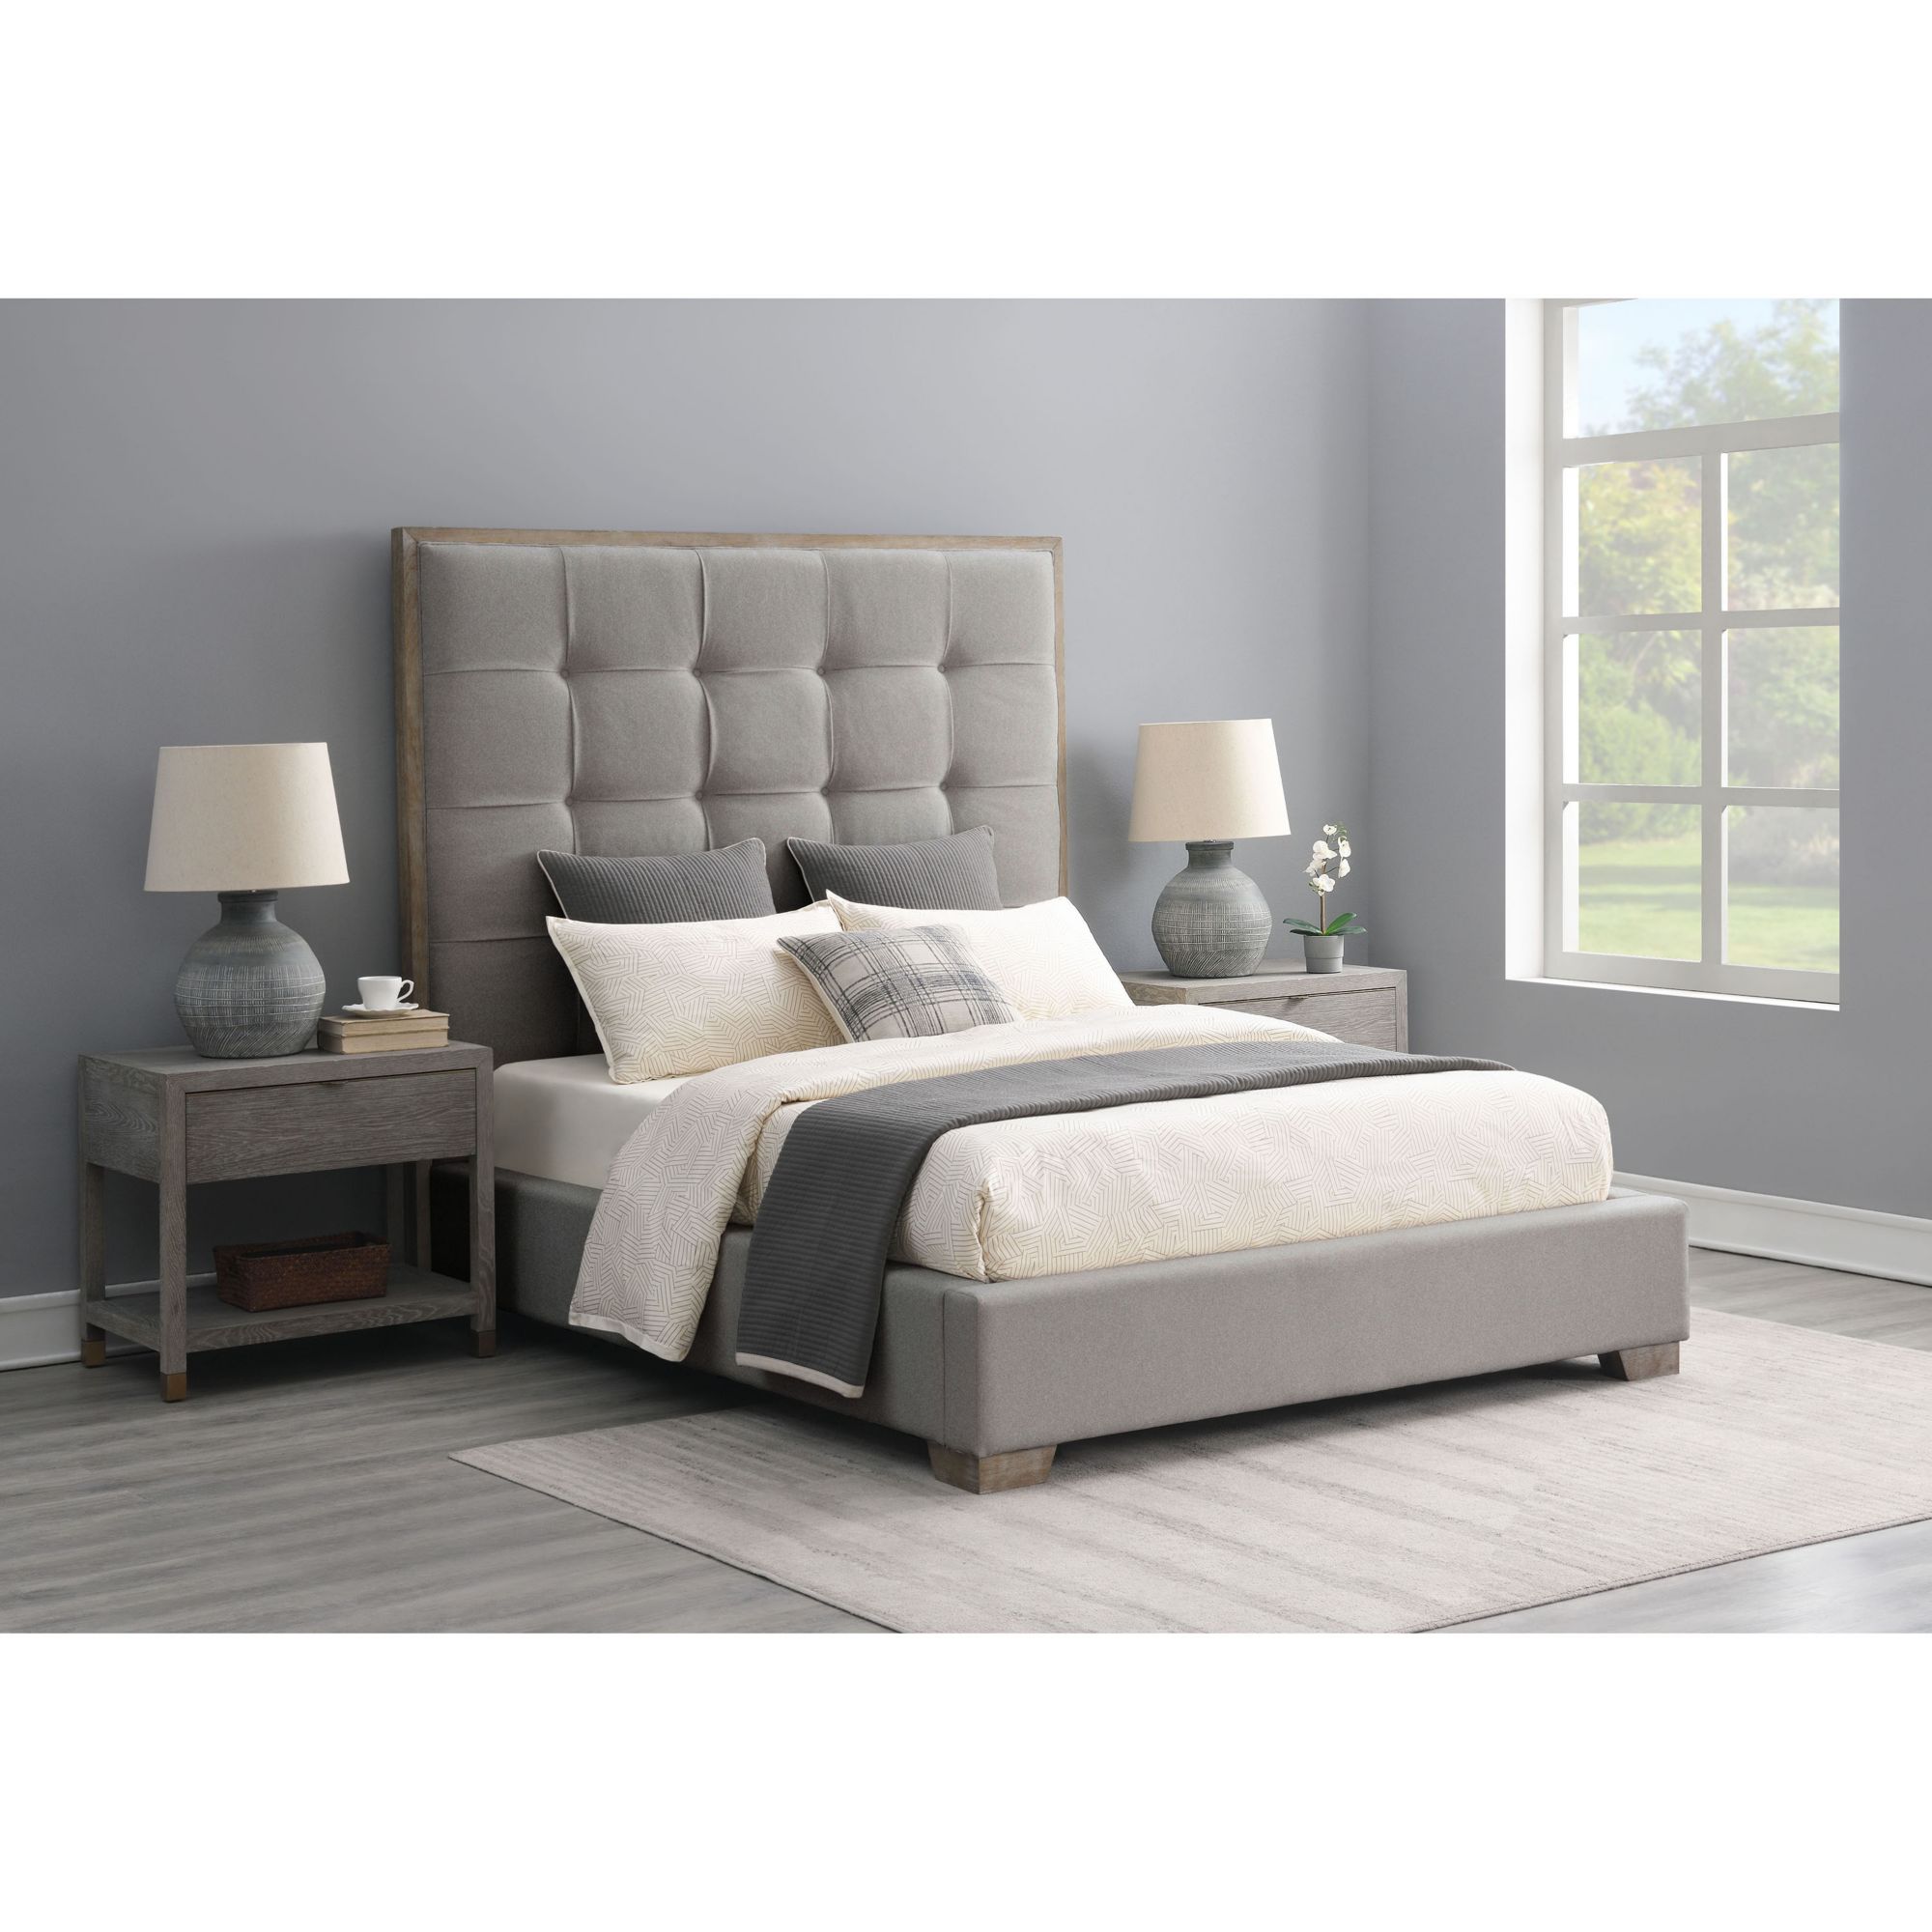 Abbyson Home Remi Stain Resistant Queen Bed - Gray